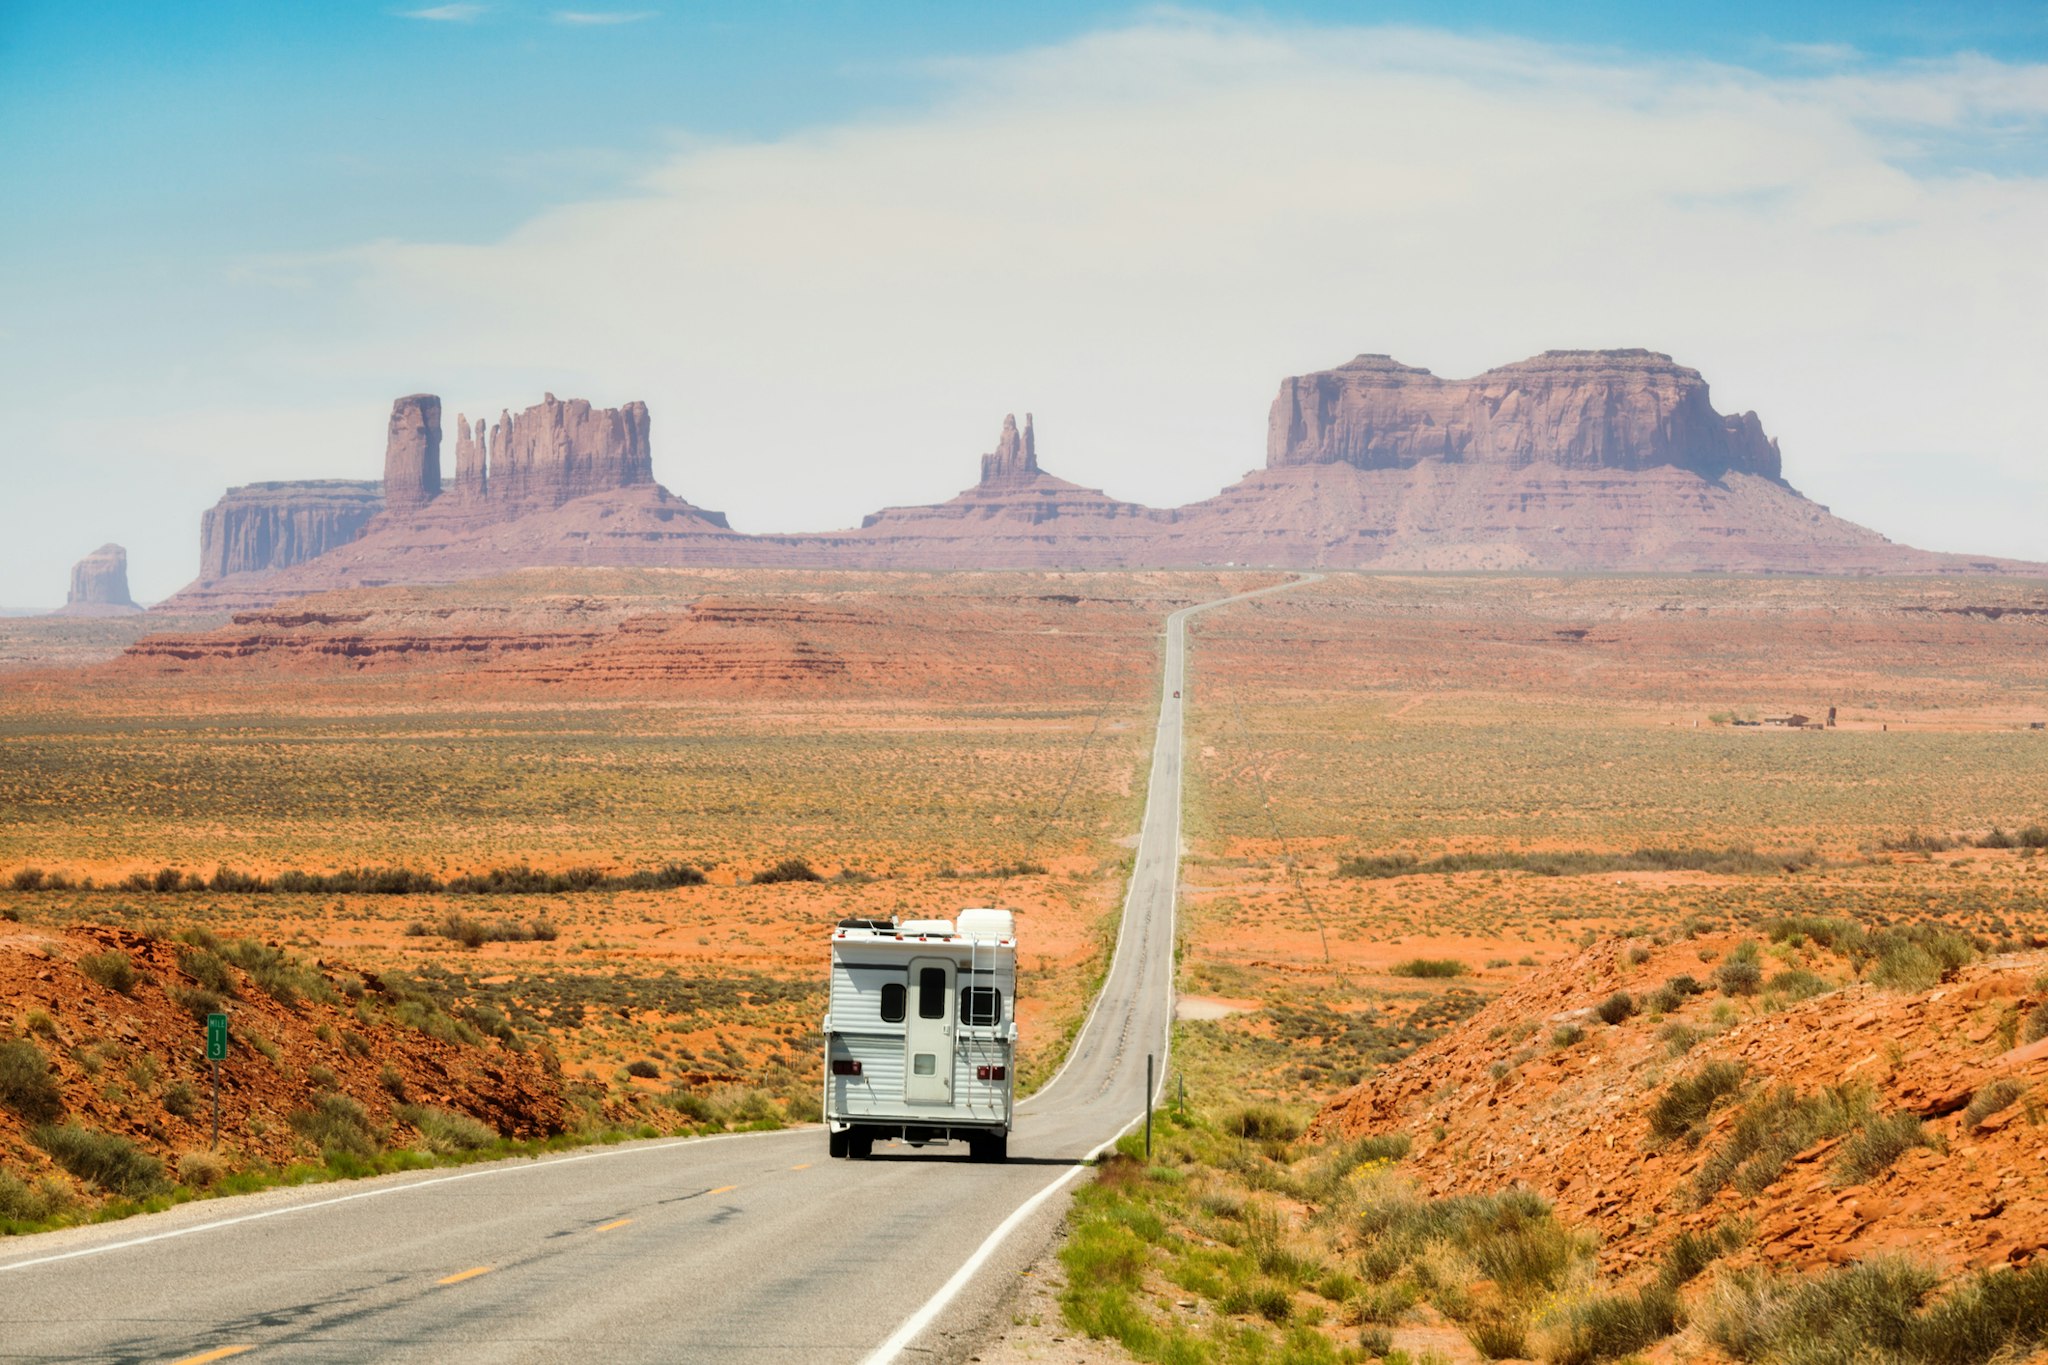 YinYang. Getty Images. Pickup camper recreational vehicle touring the American Southwest on a highway road trip near Monument Valley Tribal Park. Along the Utah and Arizona border, USA. The sandstone plateaus and rock formations are a campus place and travel destination for family vacations.